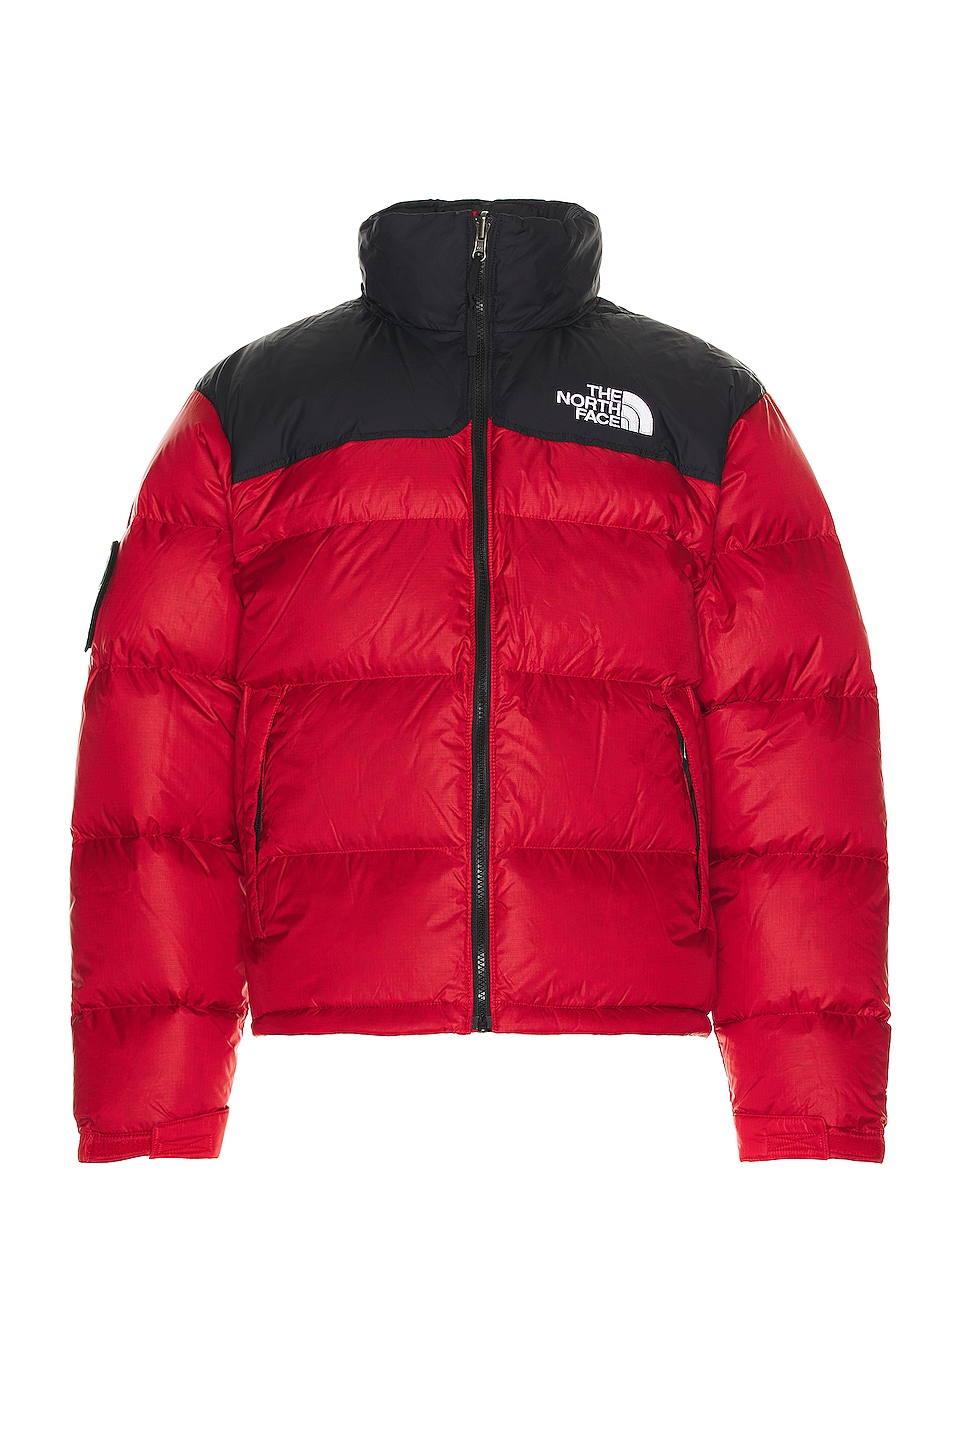 front Grit persecution The North Face 92 Retro Anniversary Nuptse Jacket in TNF Red | REVOLVE